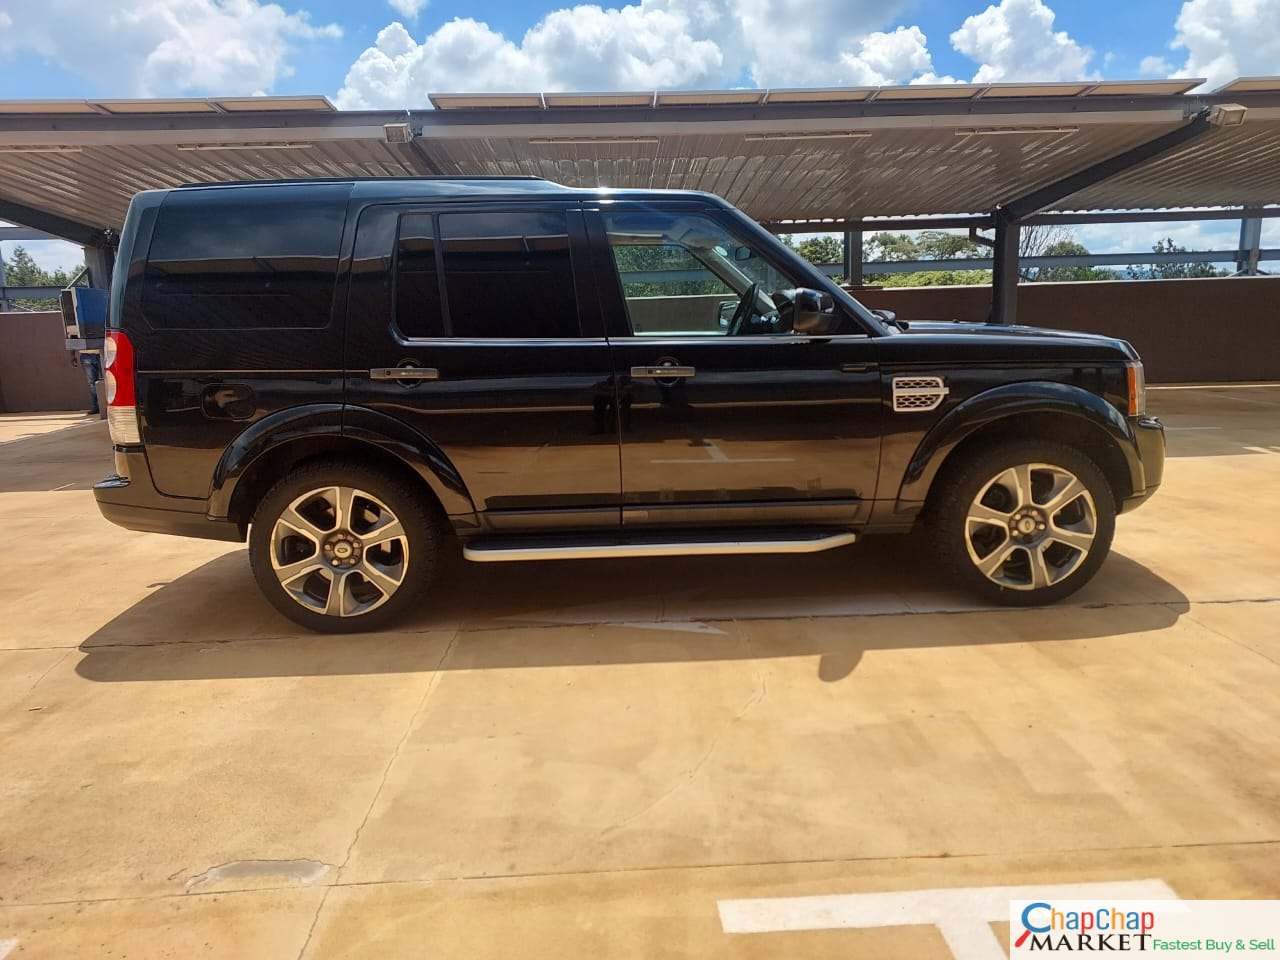 Land Rover Discovery 4 triple sunroof QUICK SALE You Pay 30% Deposit Trade in Ok For sale in kenya